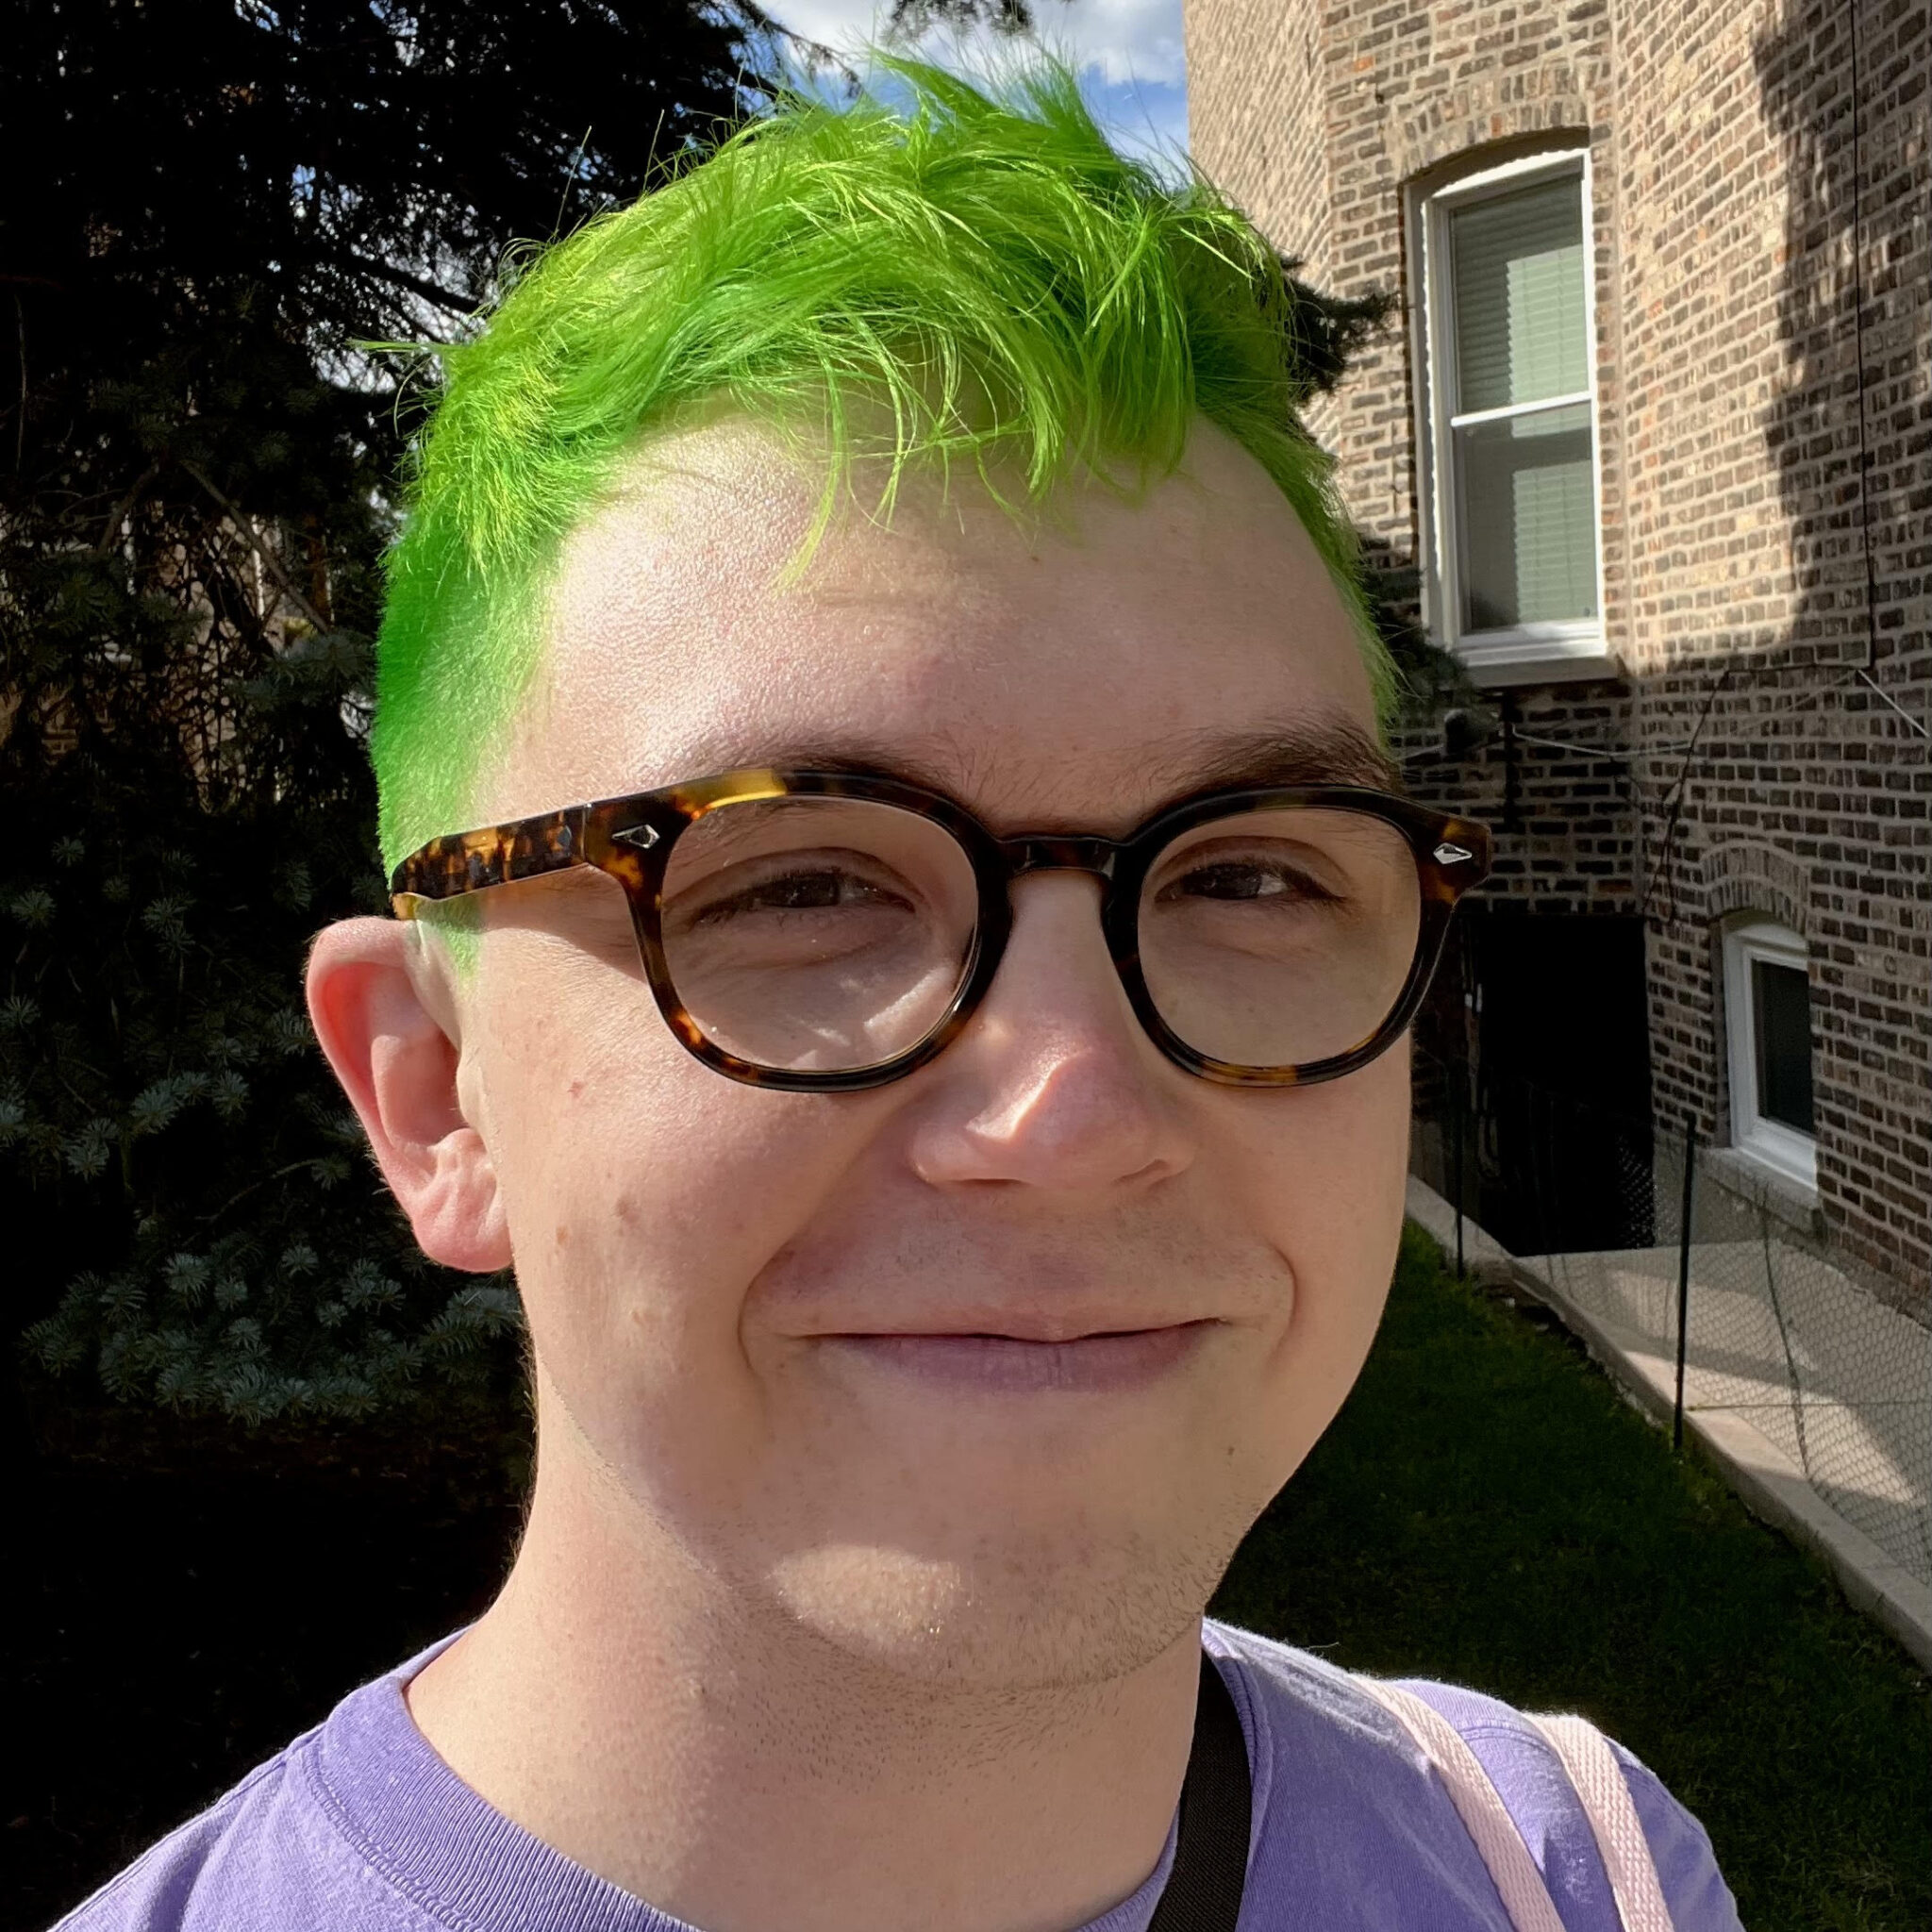 A headshot of erik morrison, a white masc nonbinary person with tortoiseshell glasses and green hair